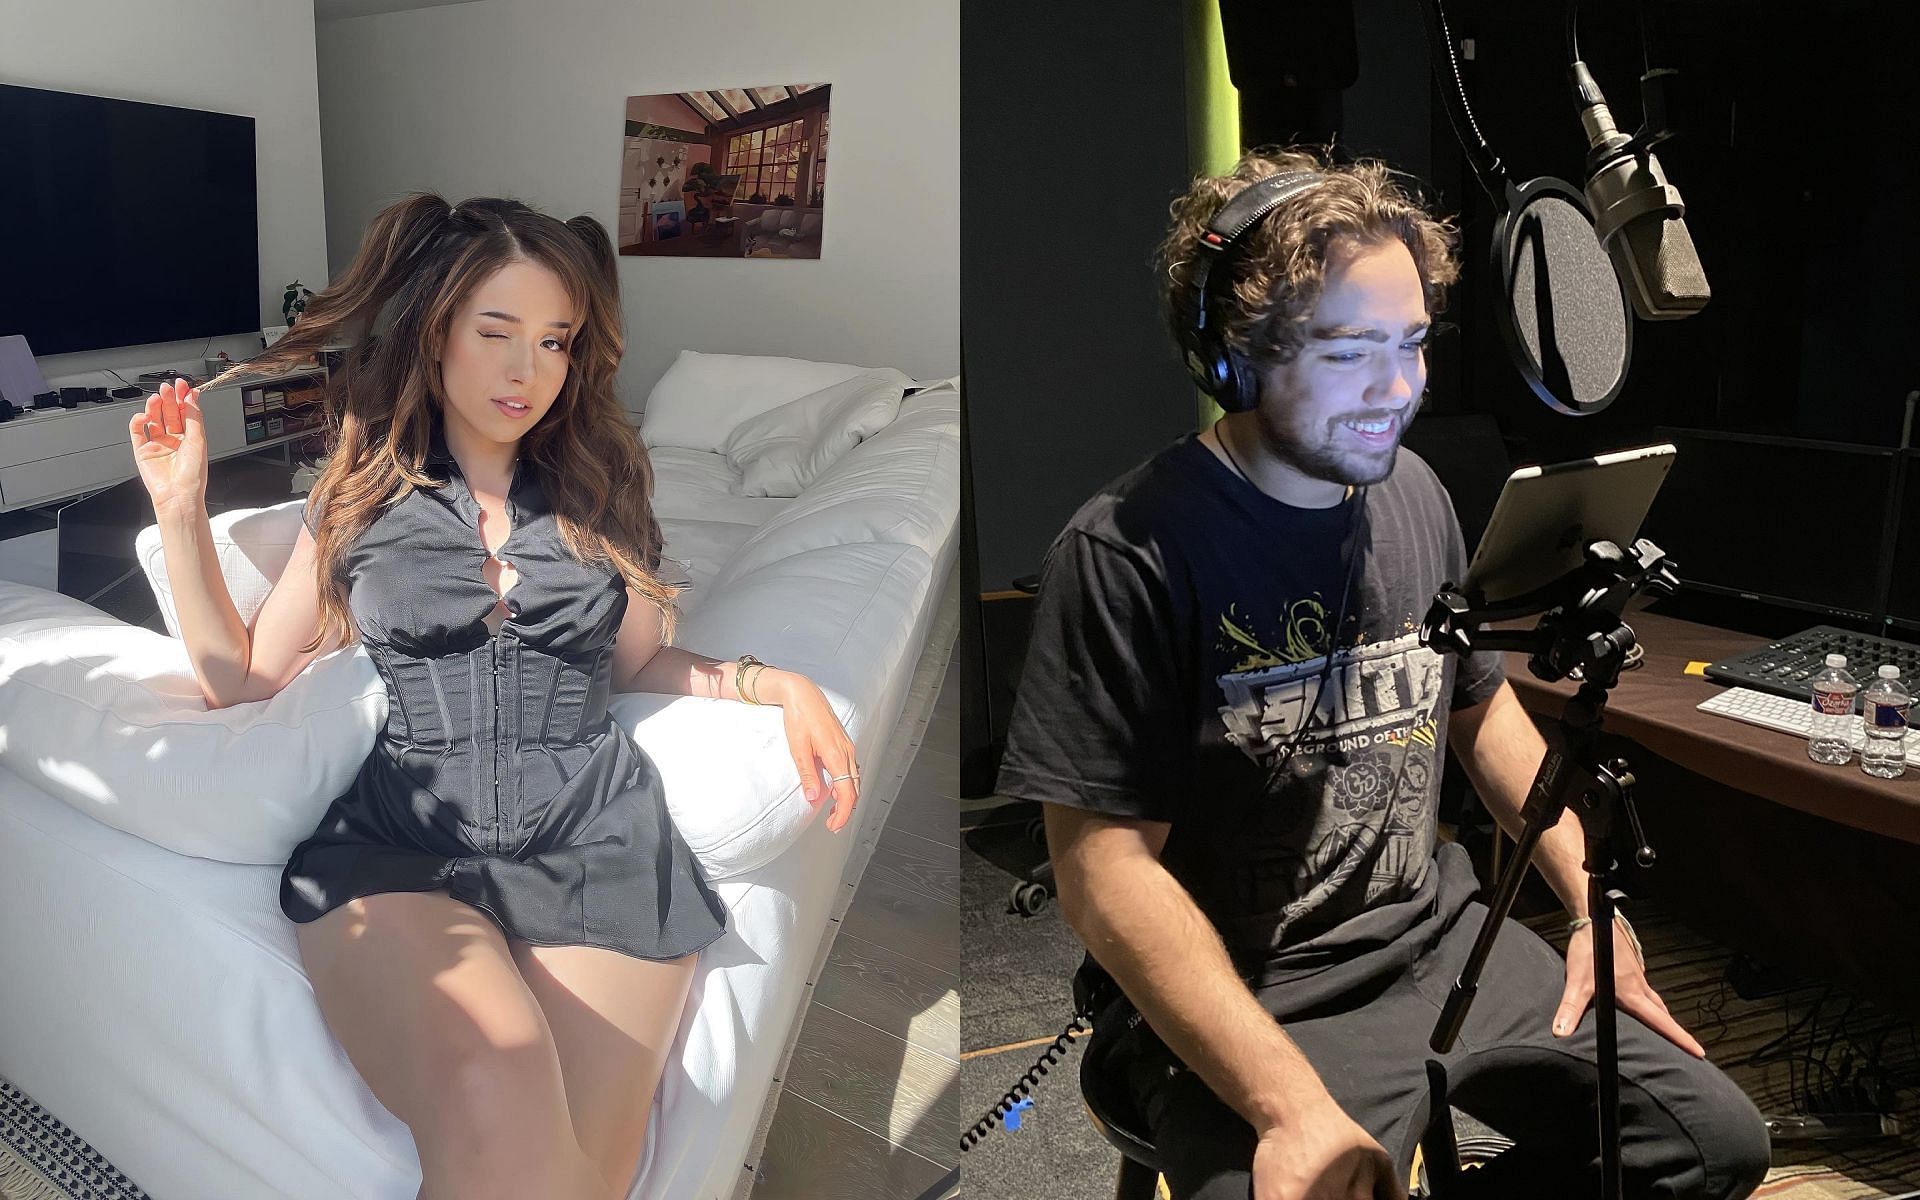 Mizkif had a fan moment after seeing Pokimane&#039;s latest picture (Images via Pokimane and Mizkif/Twitter)